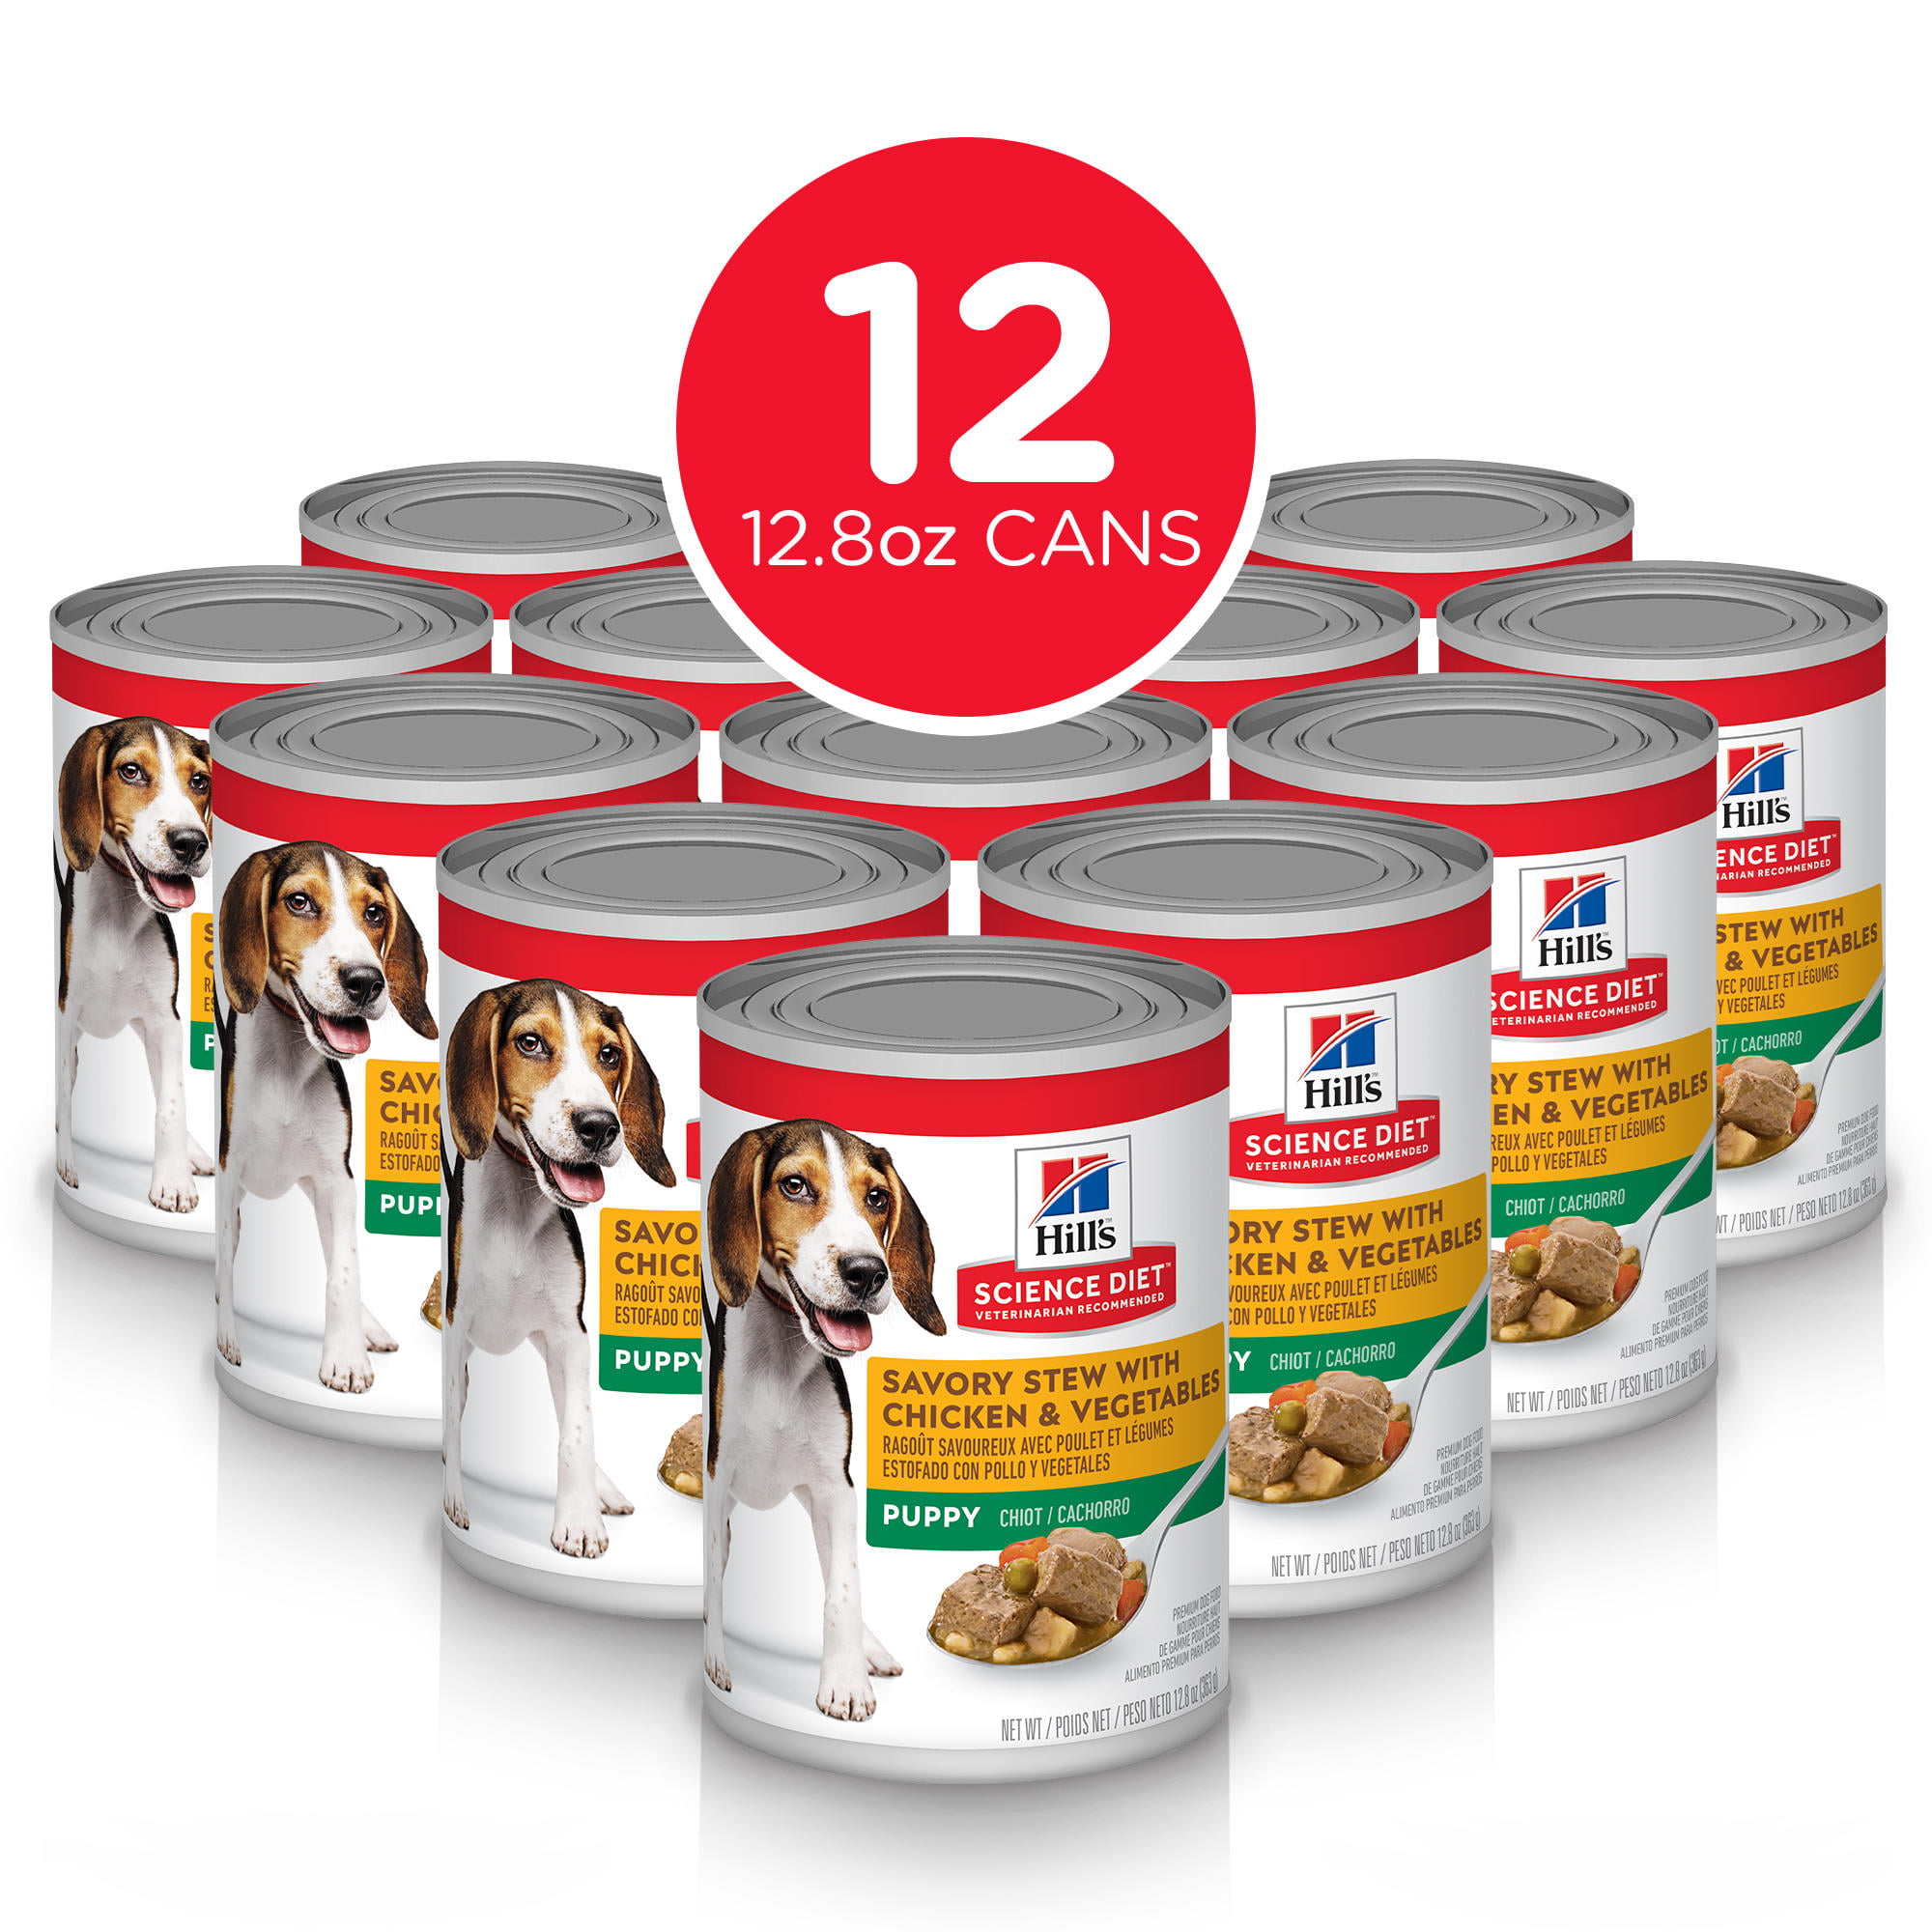 Hill's Science Diet Puppy Canned Dog Food, Savory Stew